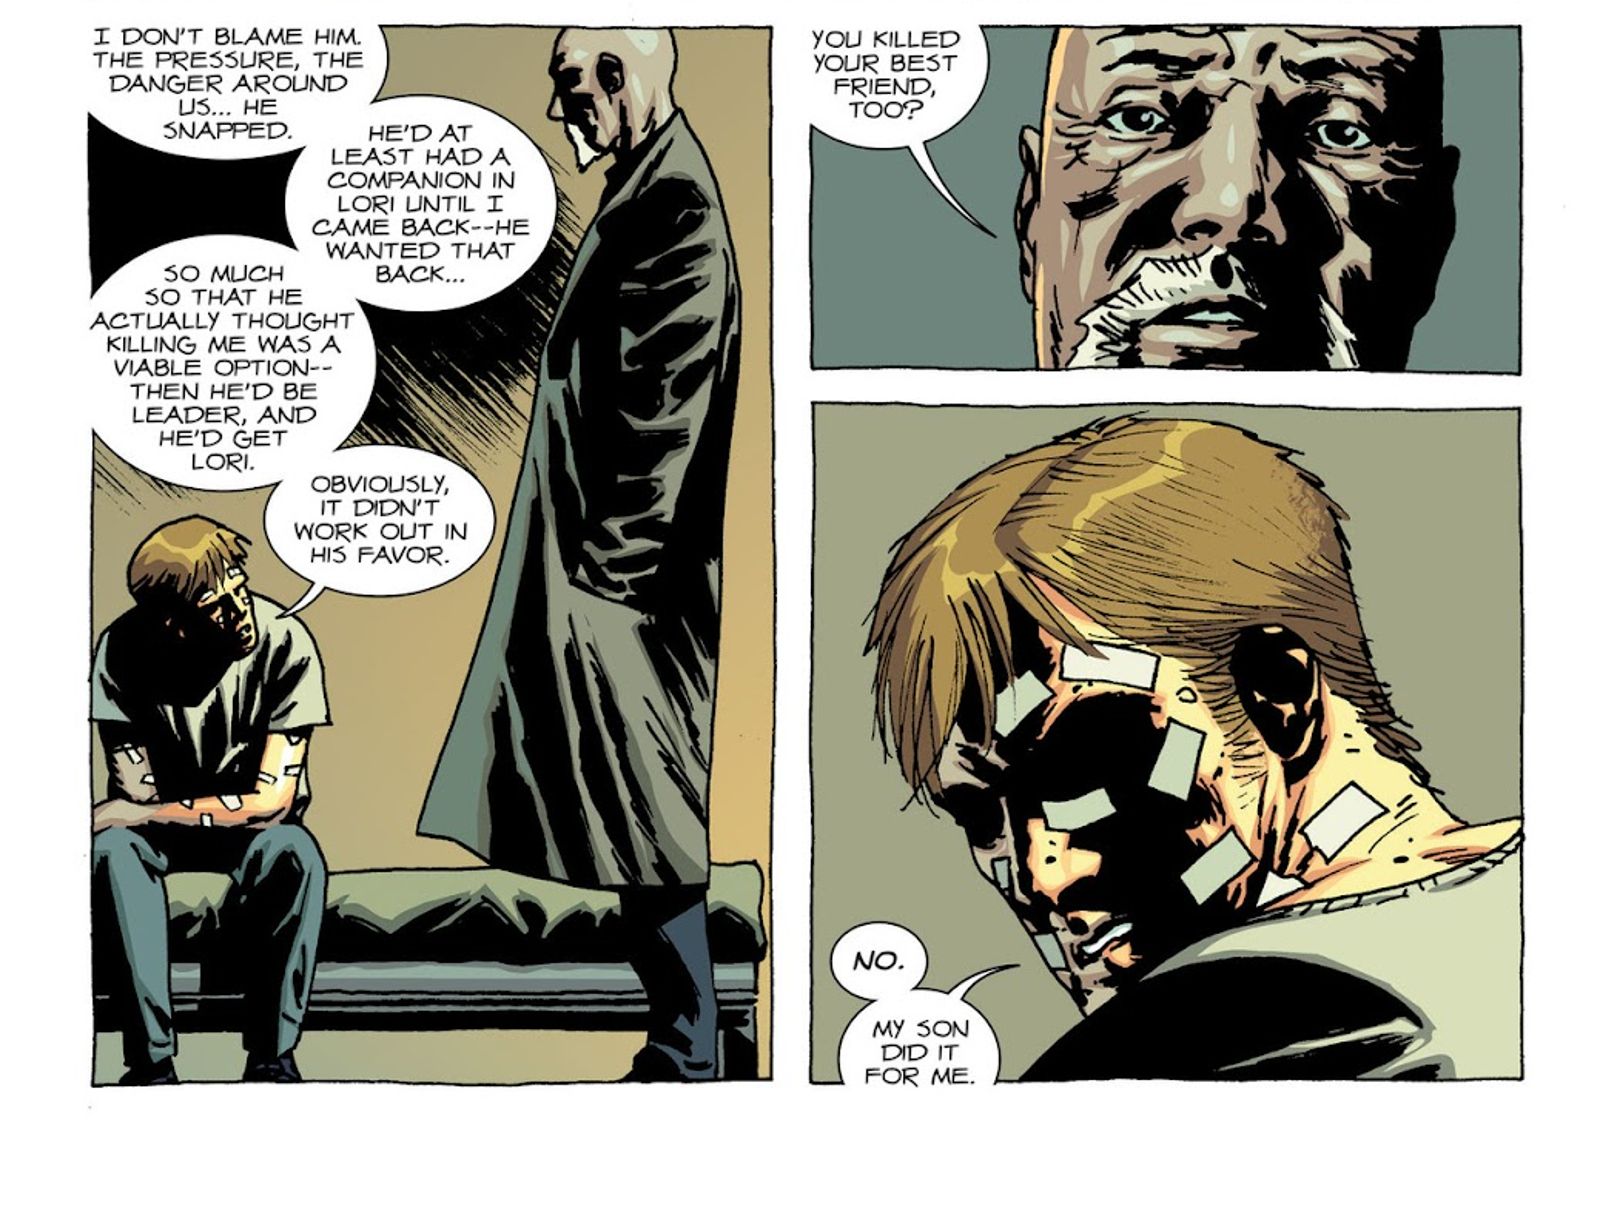 Walking Dead #73, Rick reflects on the way things ended with Shane